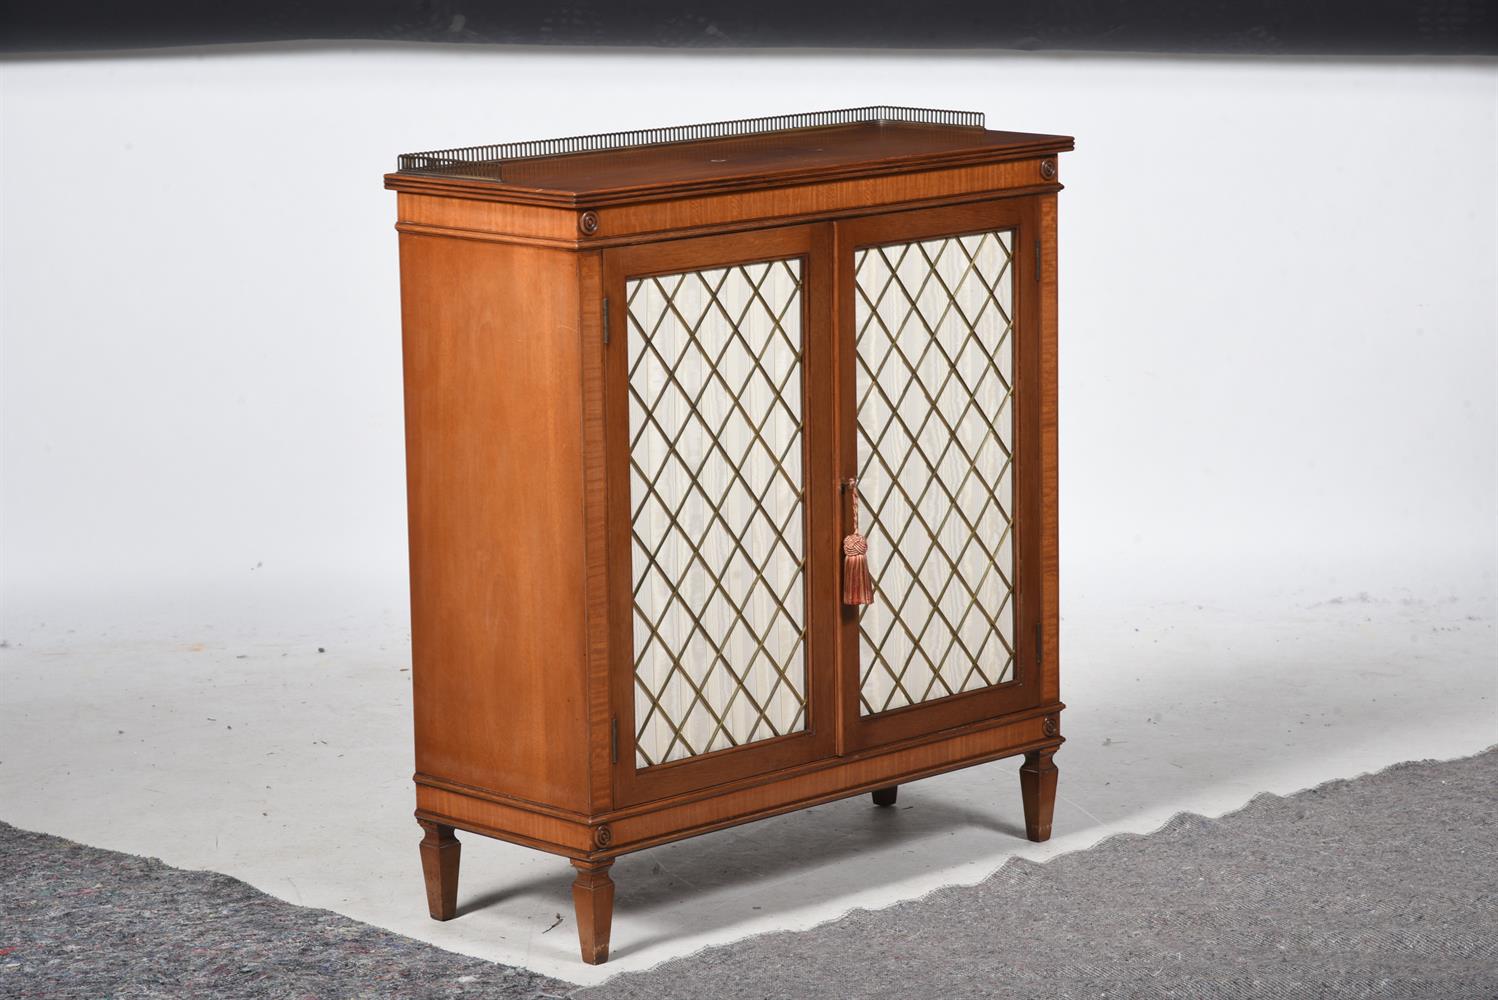 A PAIR OF MAHOGANY SIDE CABINETS IN REGENCY STYLE - Image 2 of 3